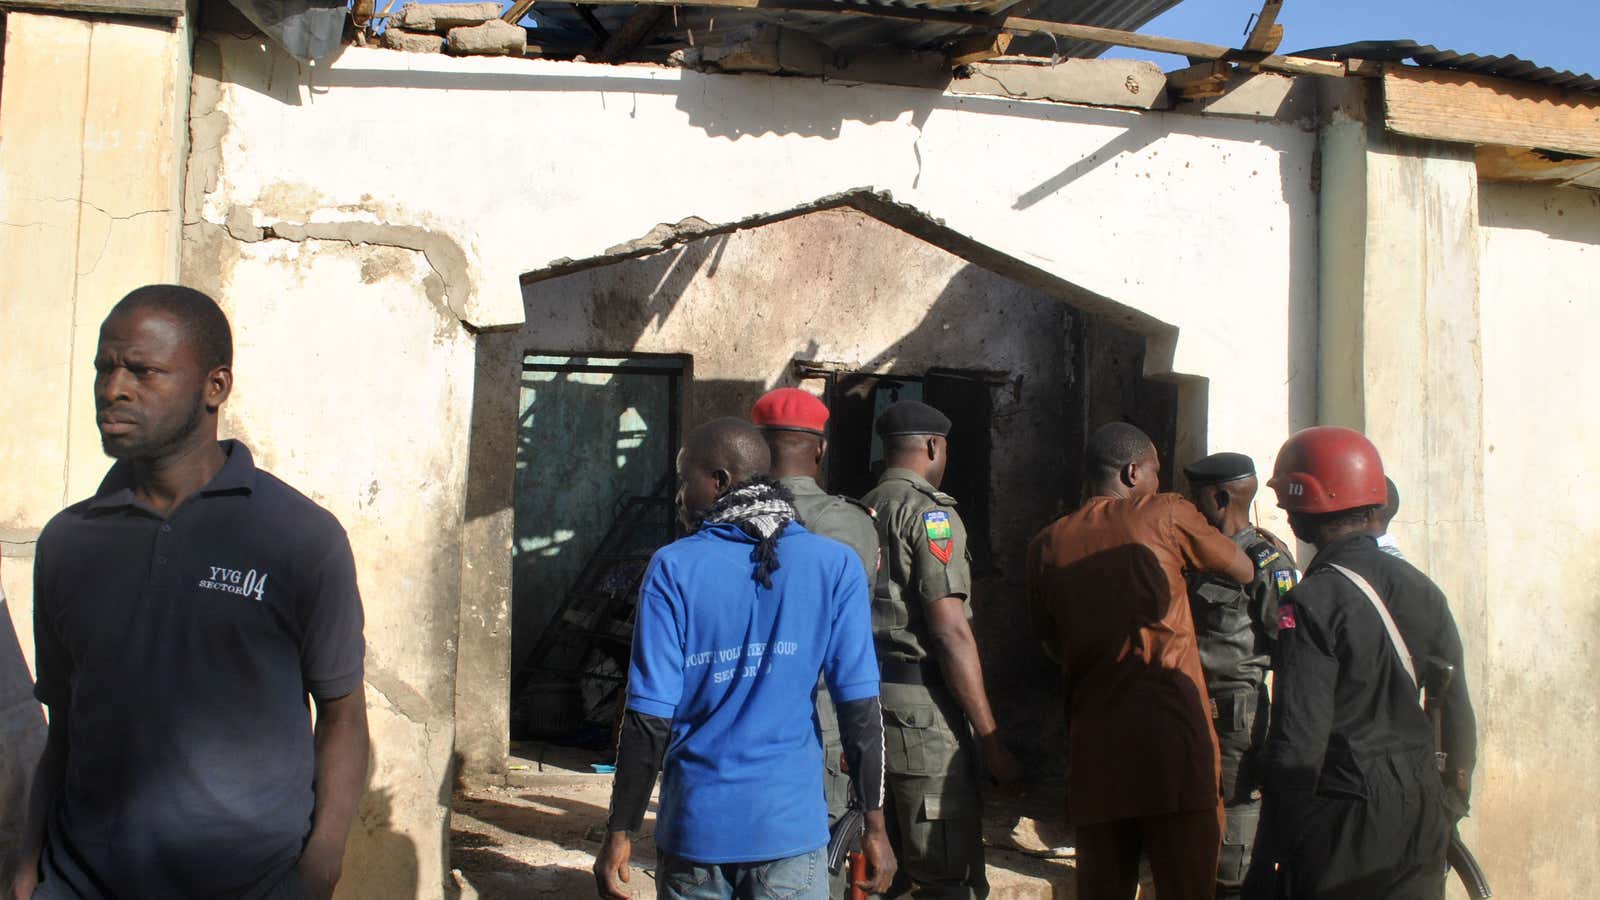 Boko Haram is being blamed for a suicide bombing that killed 30 people in Maiduguri in north east Nigeria.